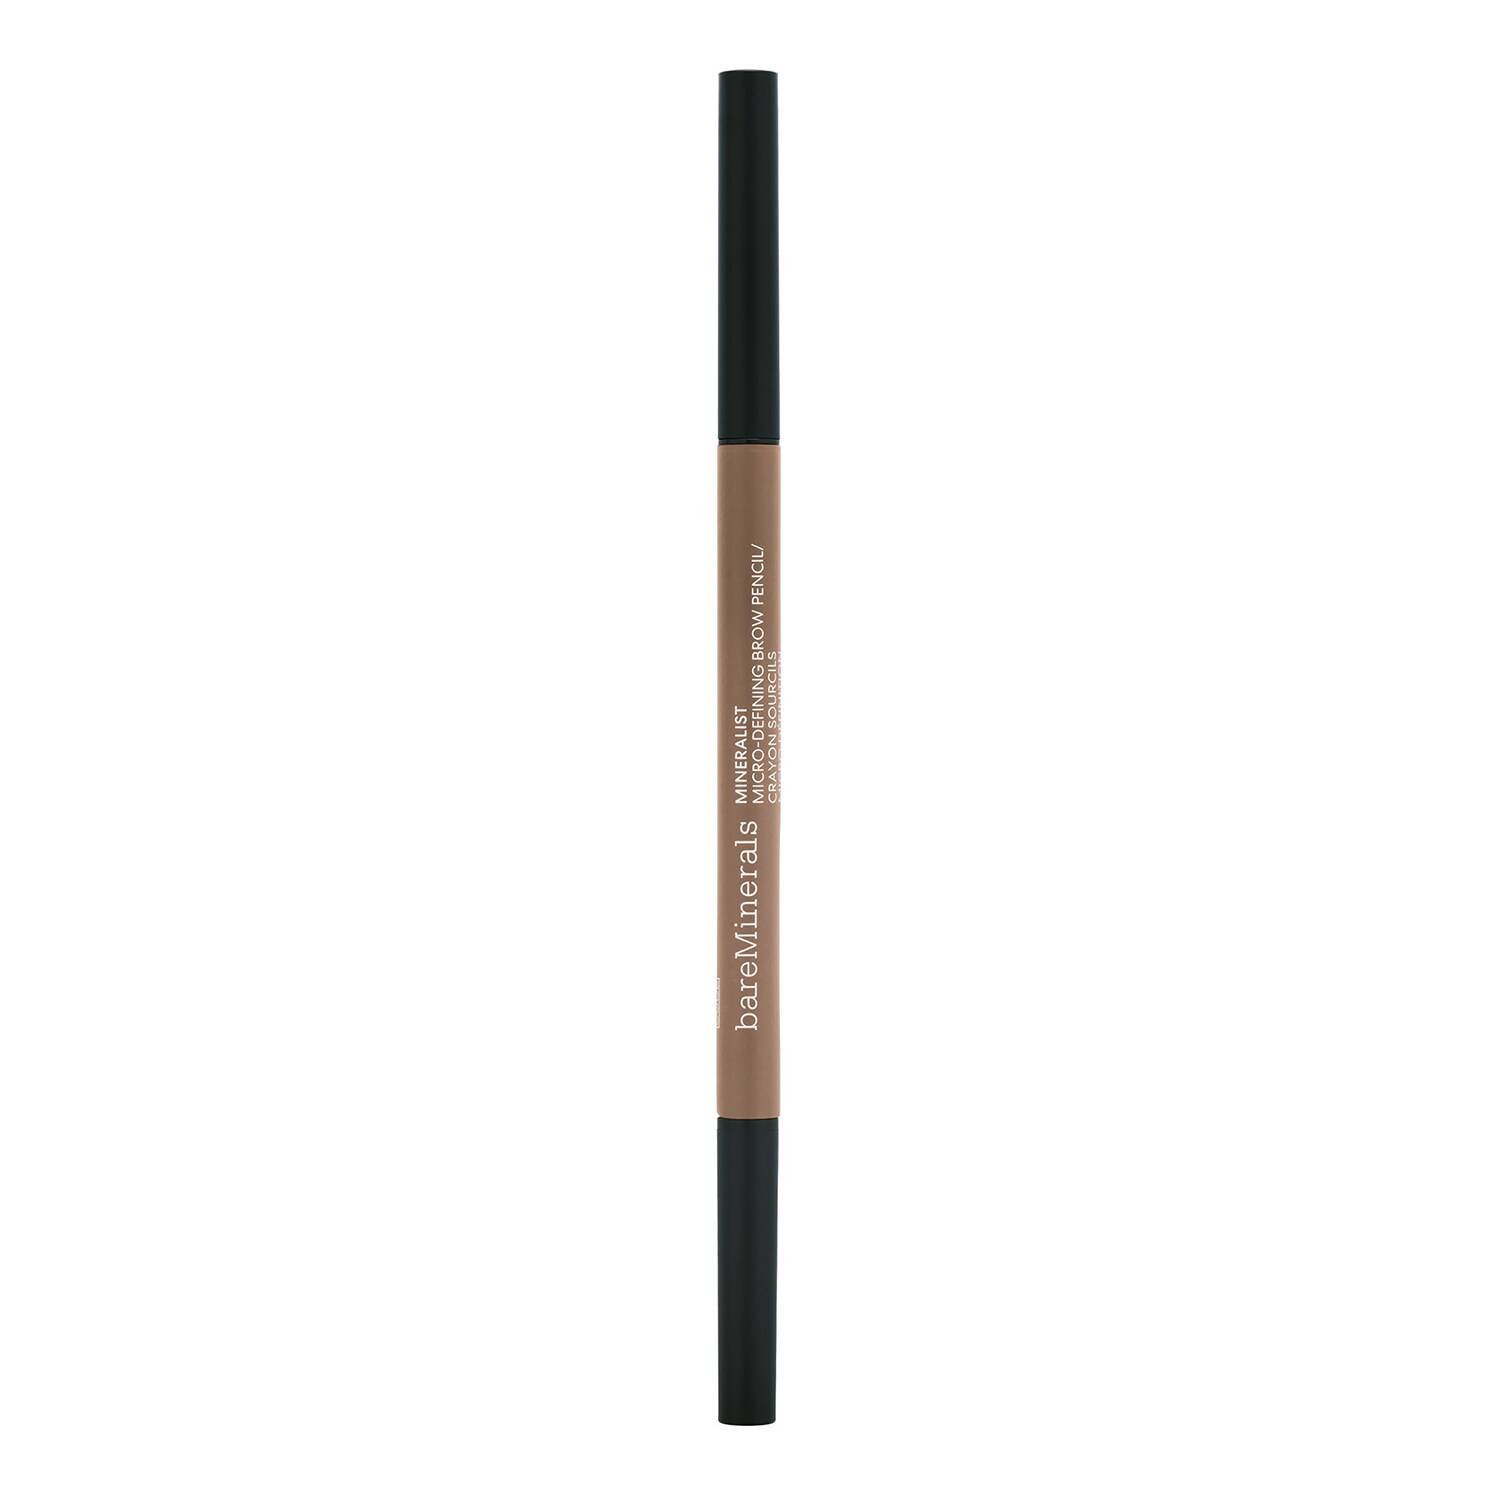 Bareminerals Mineralist Micro-Defining Brow Pencil 0.08G Taupe